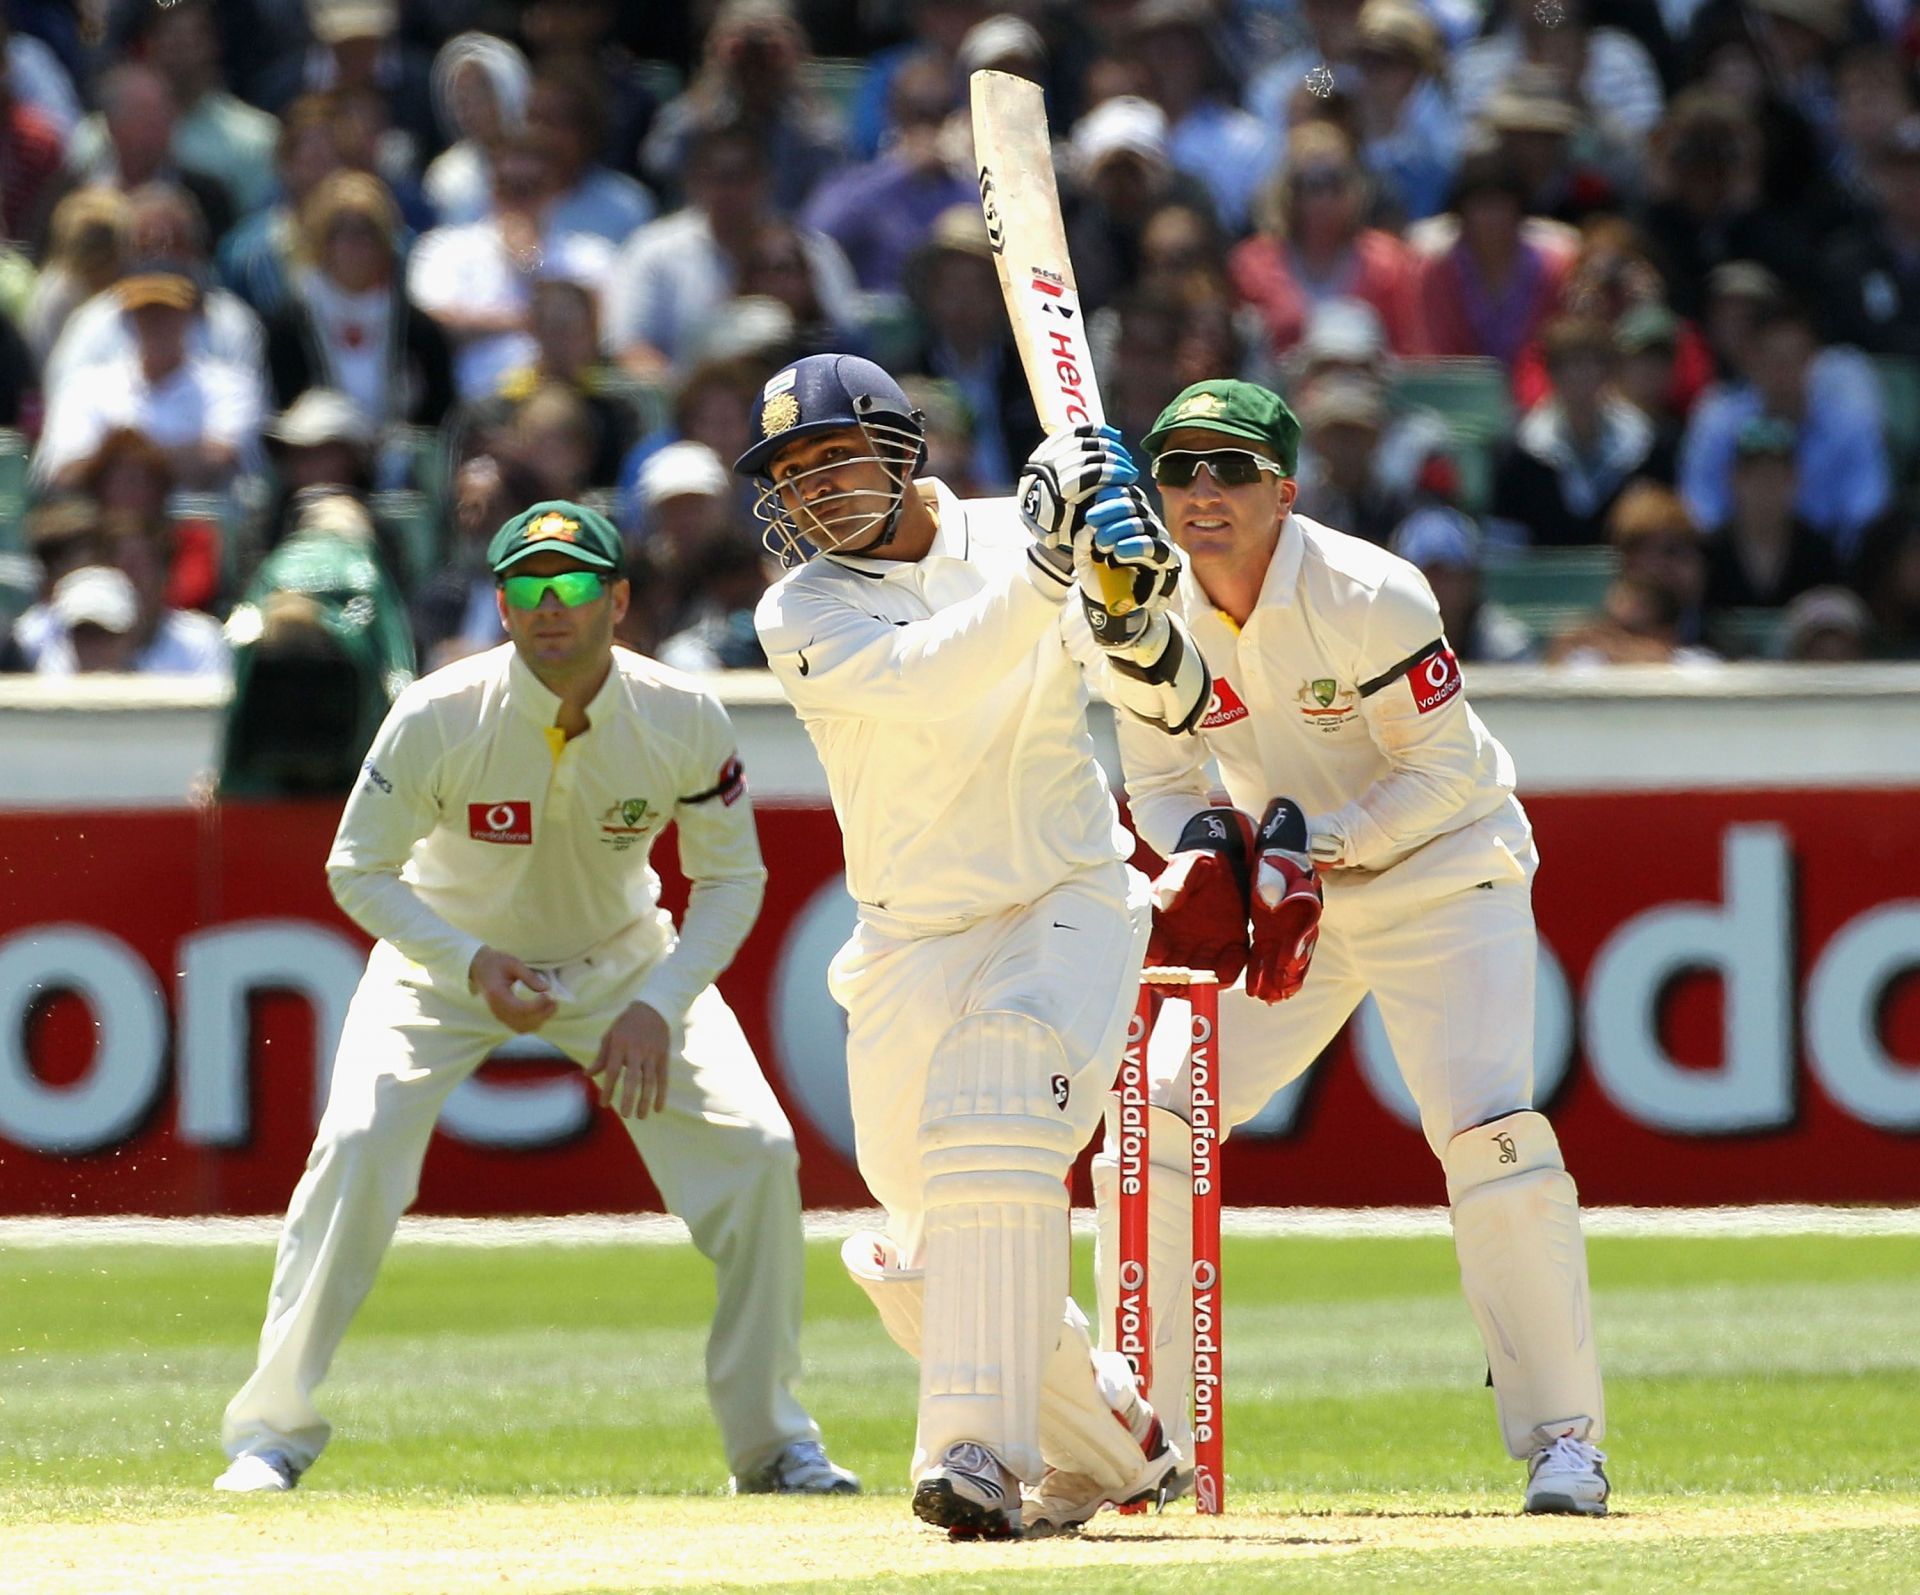 Sehwag has scored the maximum number of sixes for team India